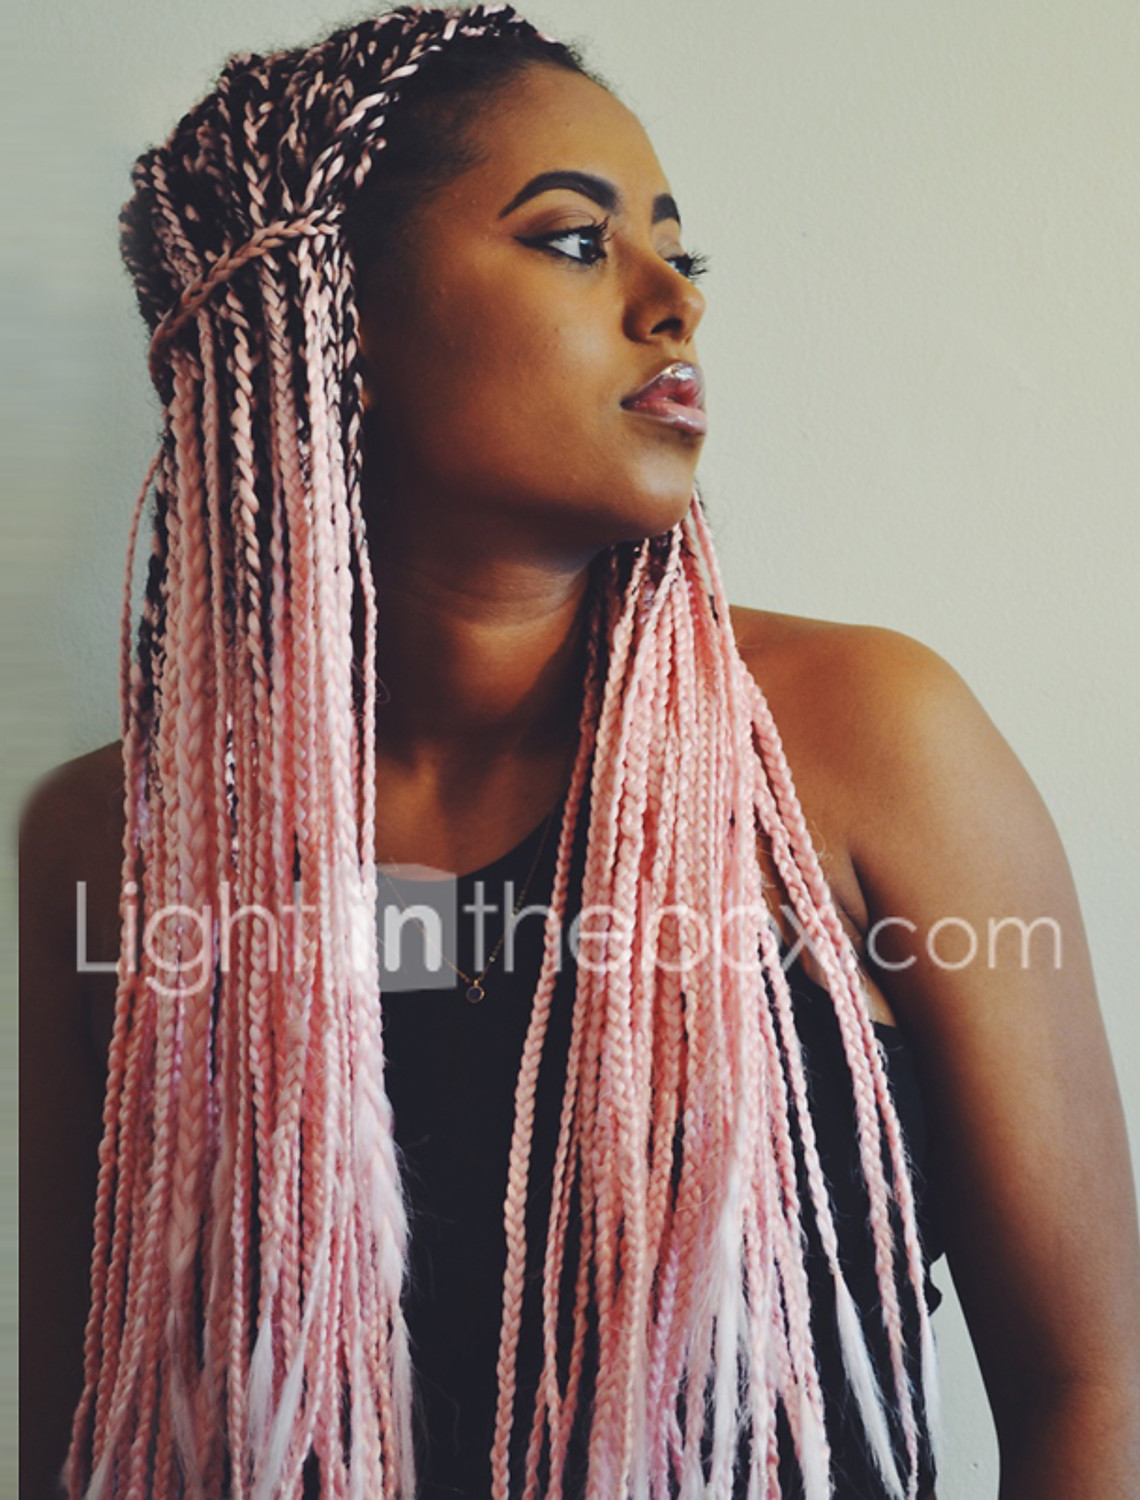 Synthetic Wig Box Braids Kardashian Braid Wig Pink Ombre Long Black Pink Synthetic Hair 24 Inch Women S Ombre Hair Middle Part Braided Wig Pink Ombre 6762727 2021 62 39